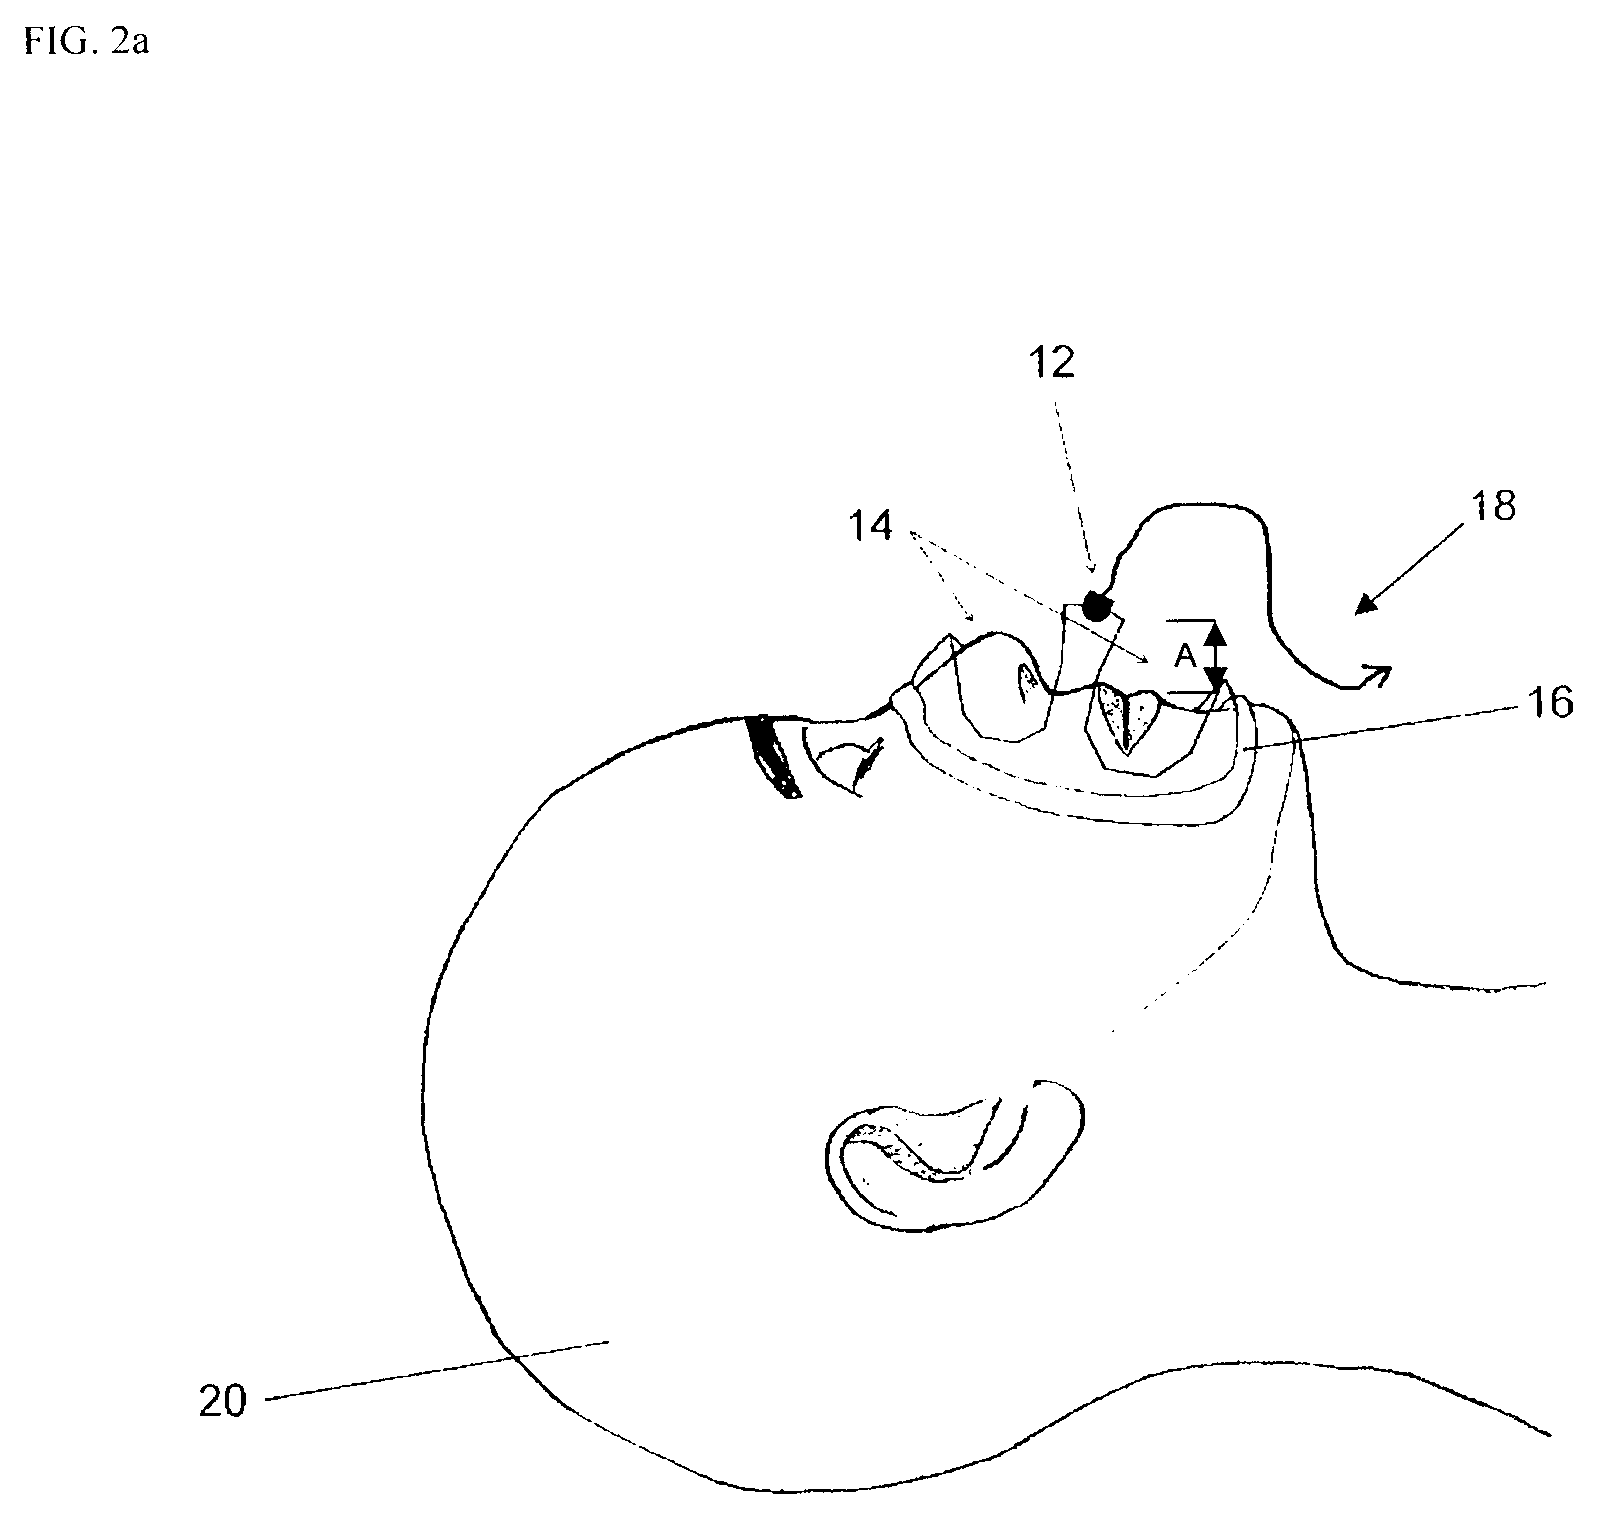 Method and apparatus for monitoring breathing cycle by frequency analysis of an acoustic data stream